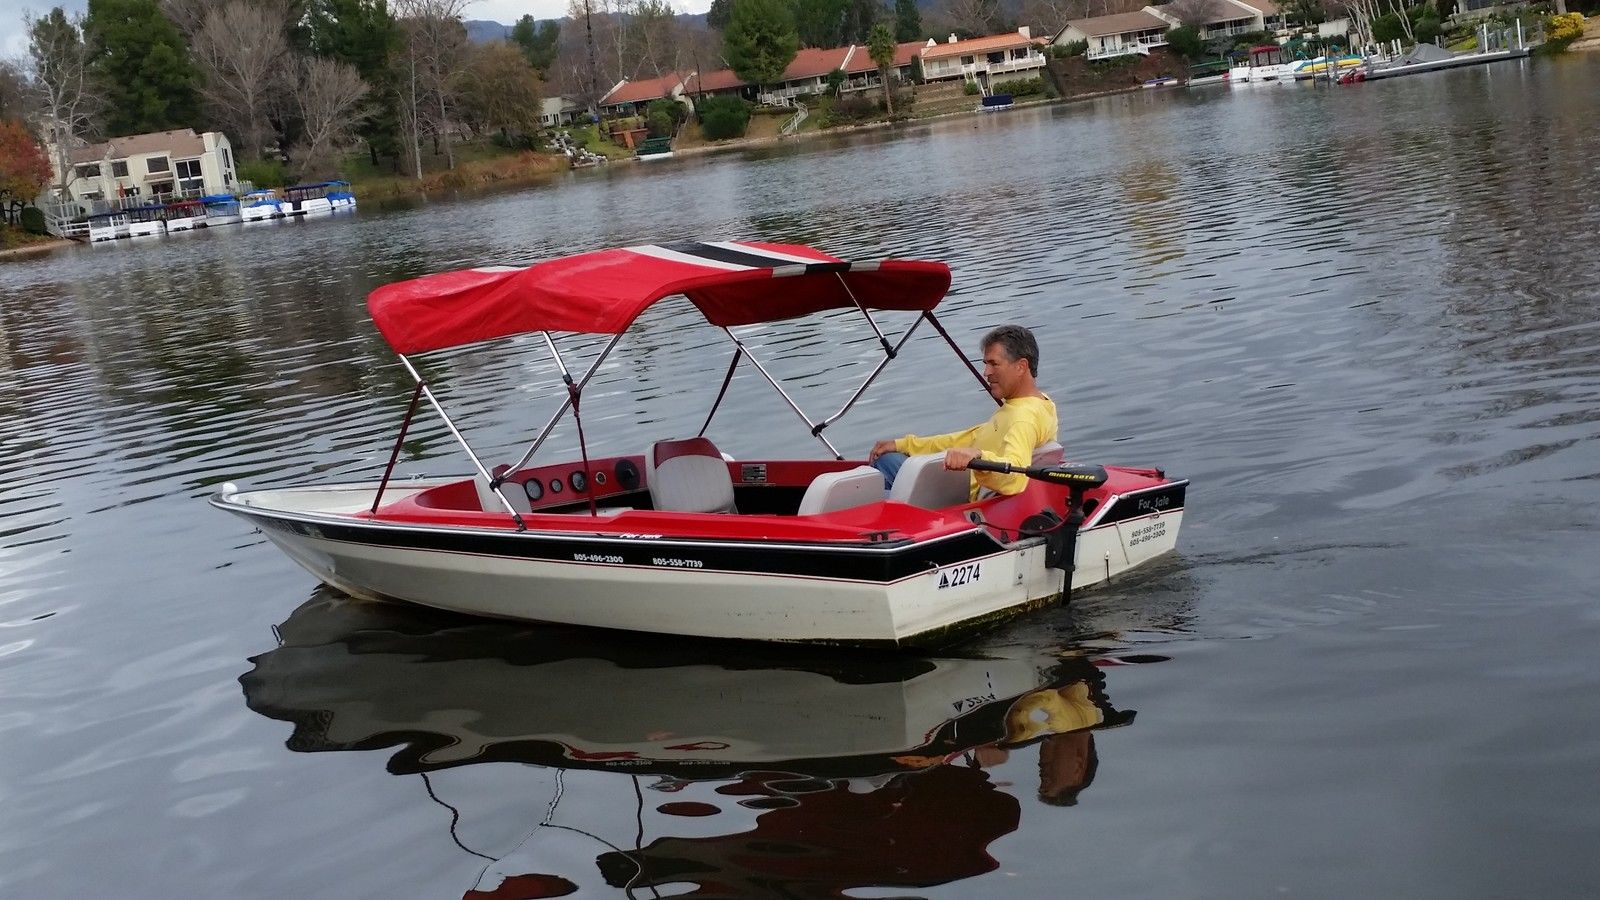 Witchcraft 16' ELECTRIC BOAT 2014 for sale for $1,500 ...